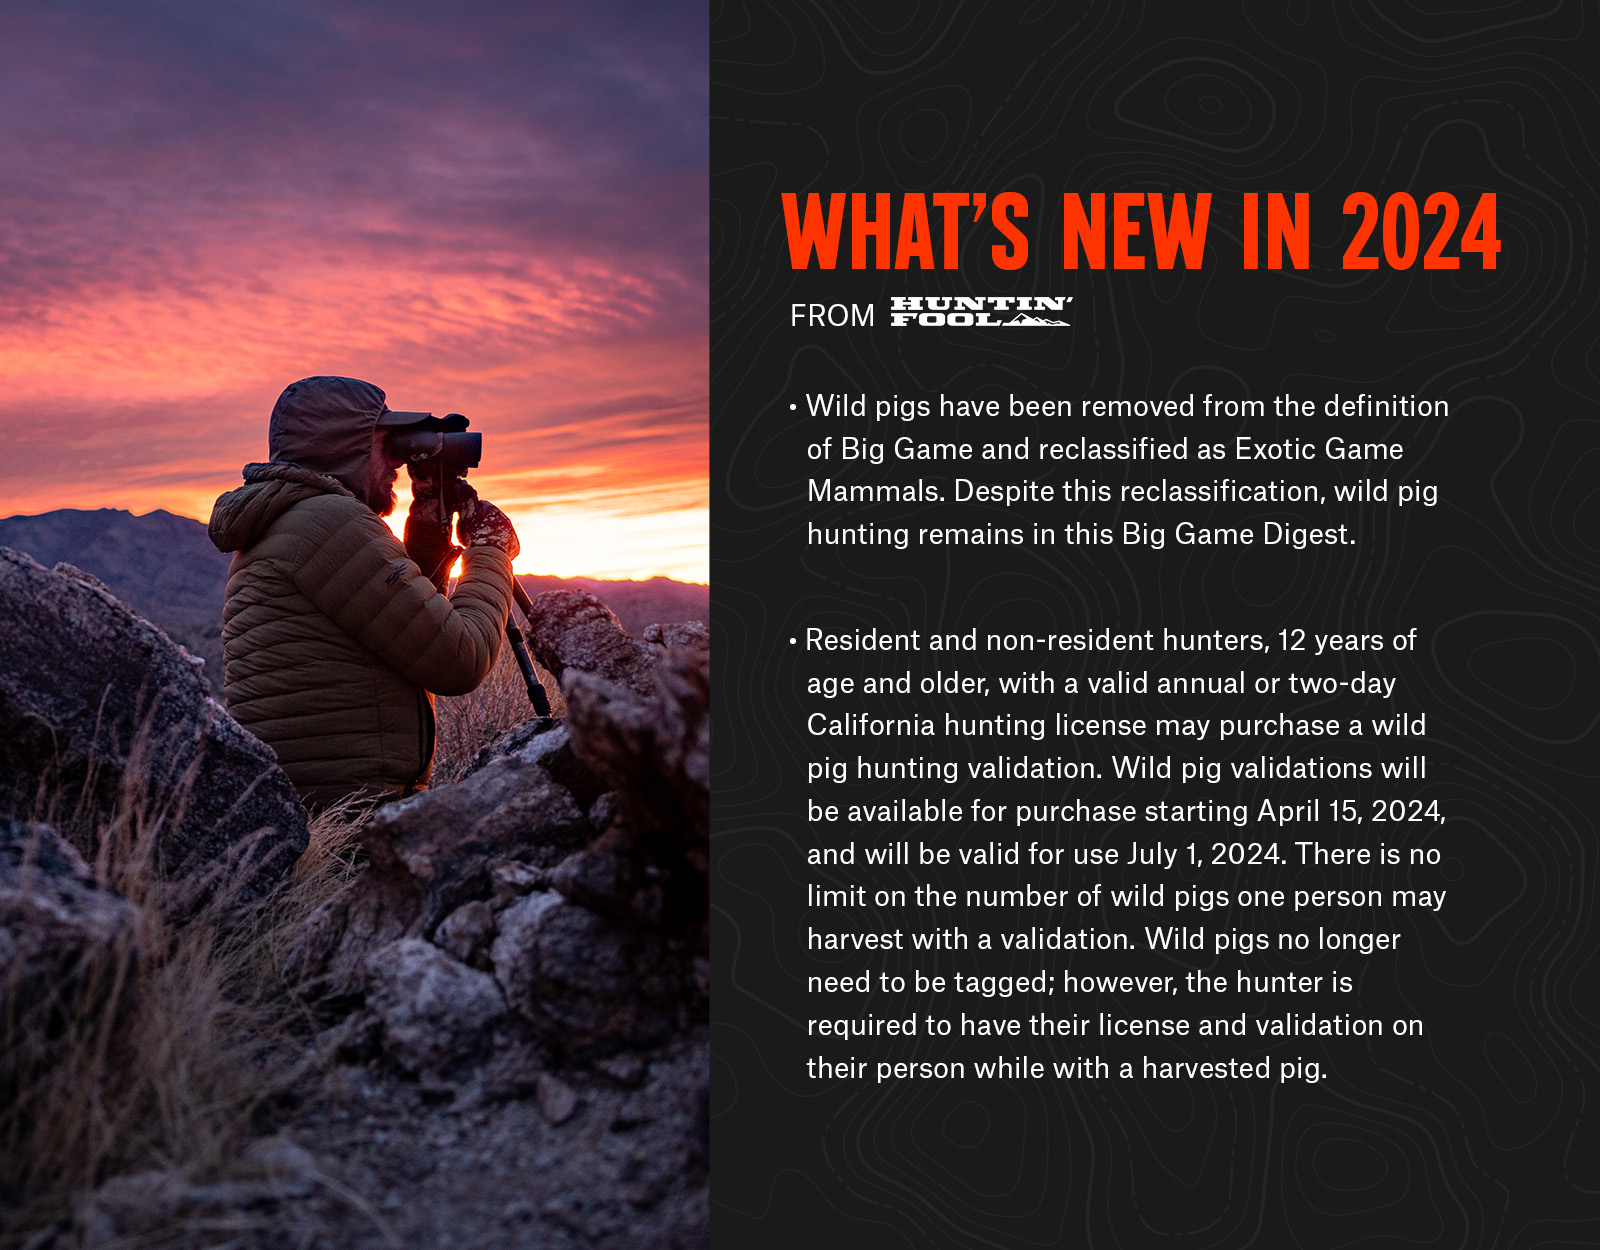 Showing what is new in California hunting